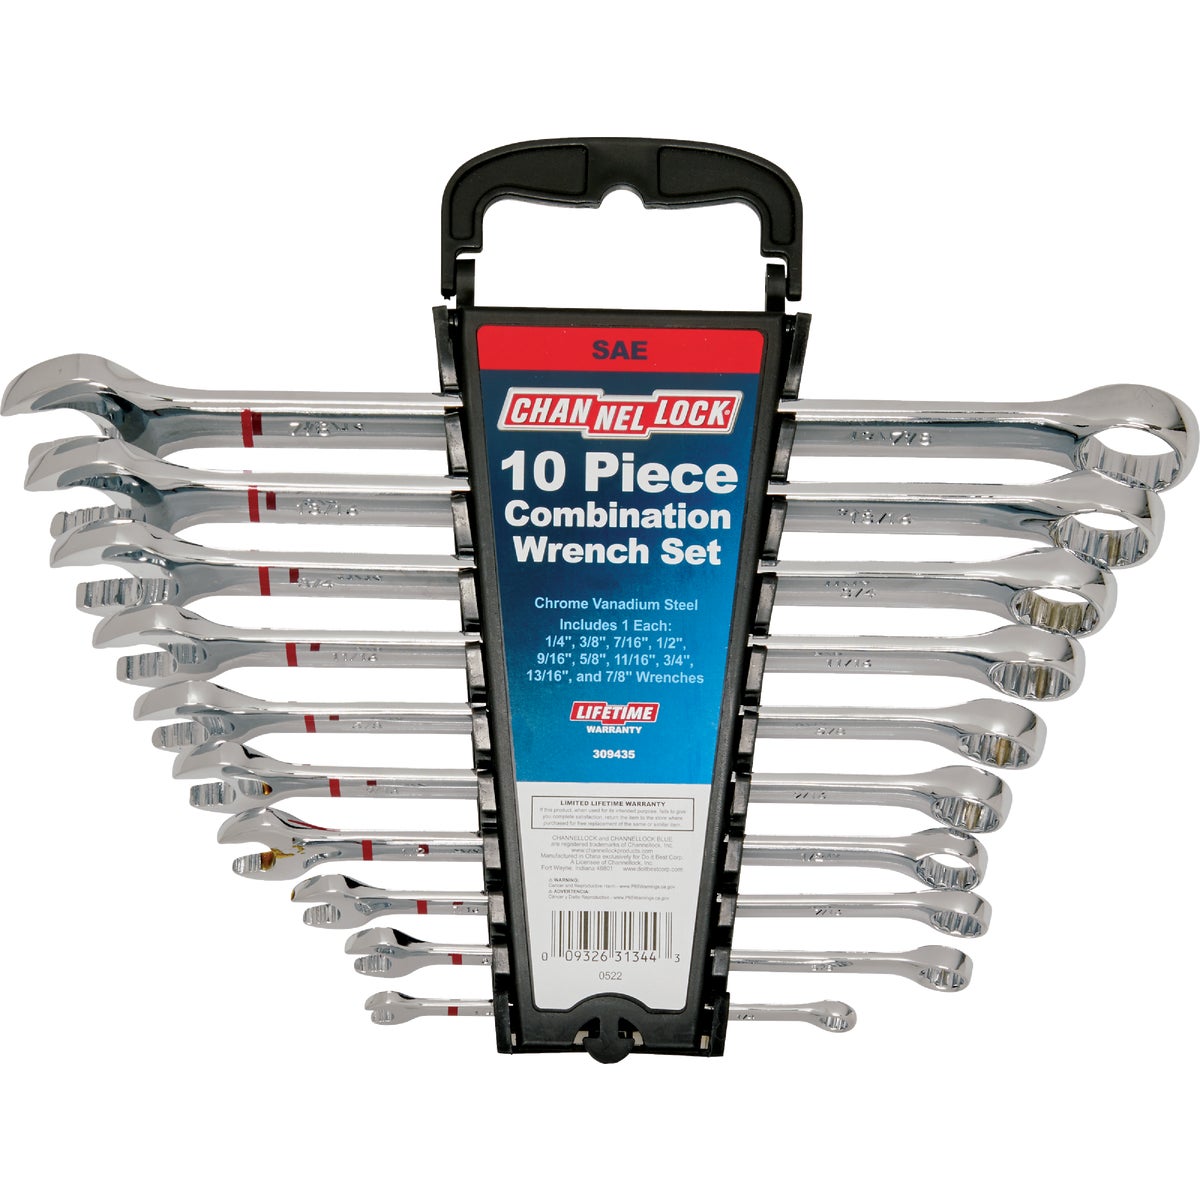 Channellock Standard 12-Point Combination Wrench Set (10-Piece)